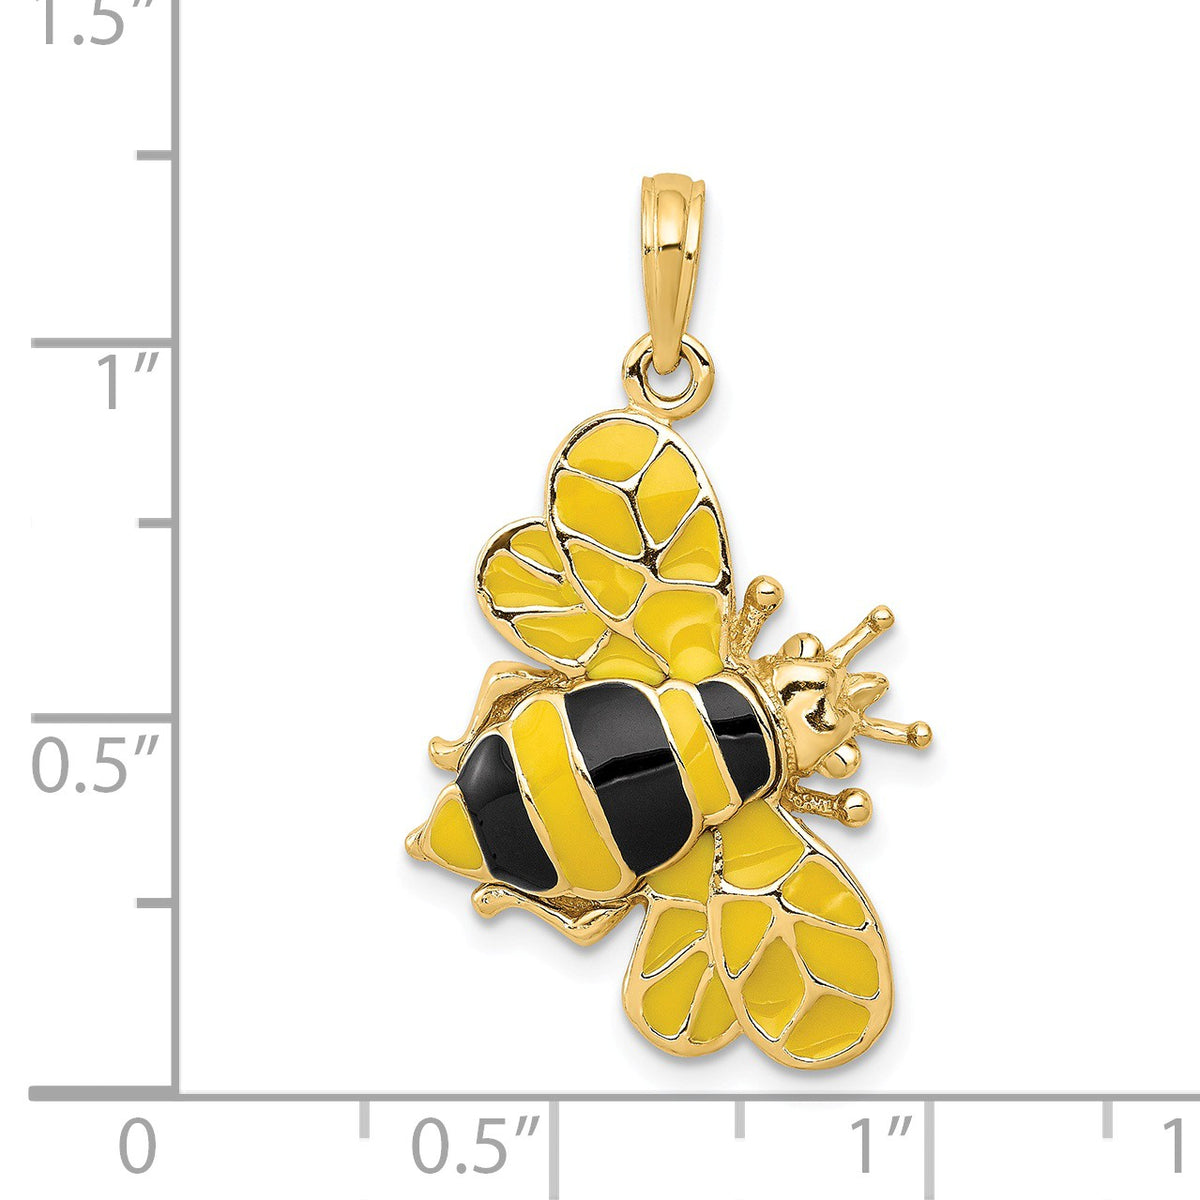 Alternate view of the 14k Yellow Gold and Enamel 3D Bumblebee Pendant by The Black Bow Jewelry Co.